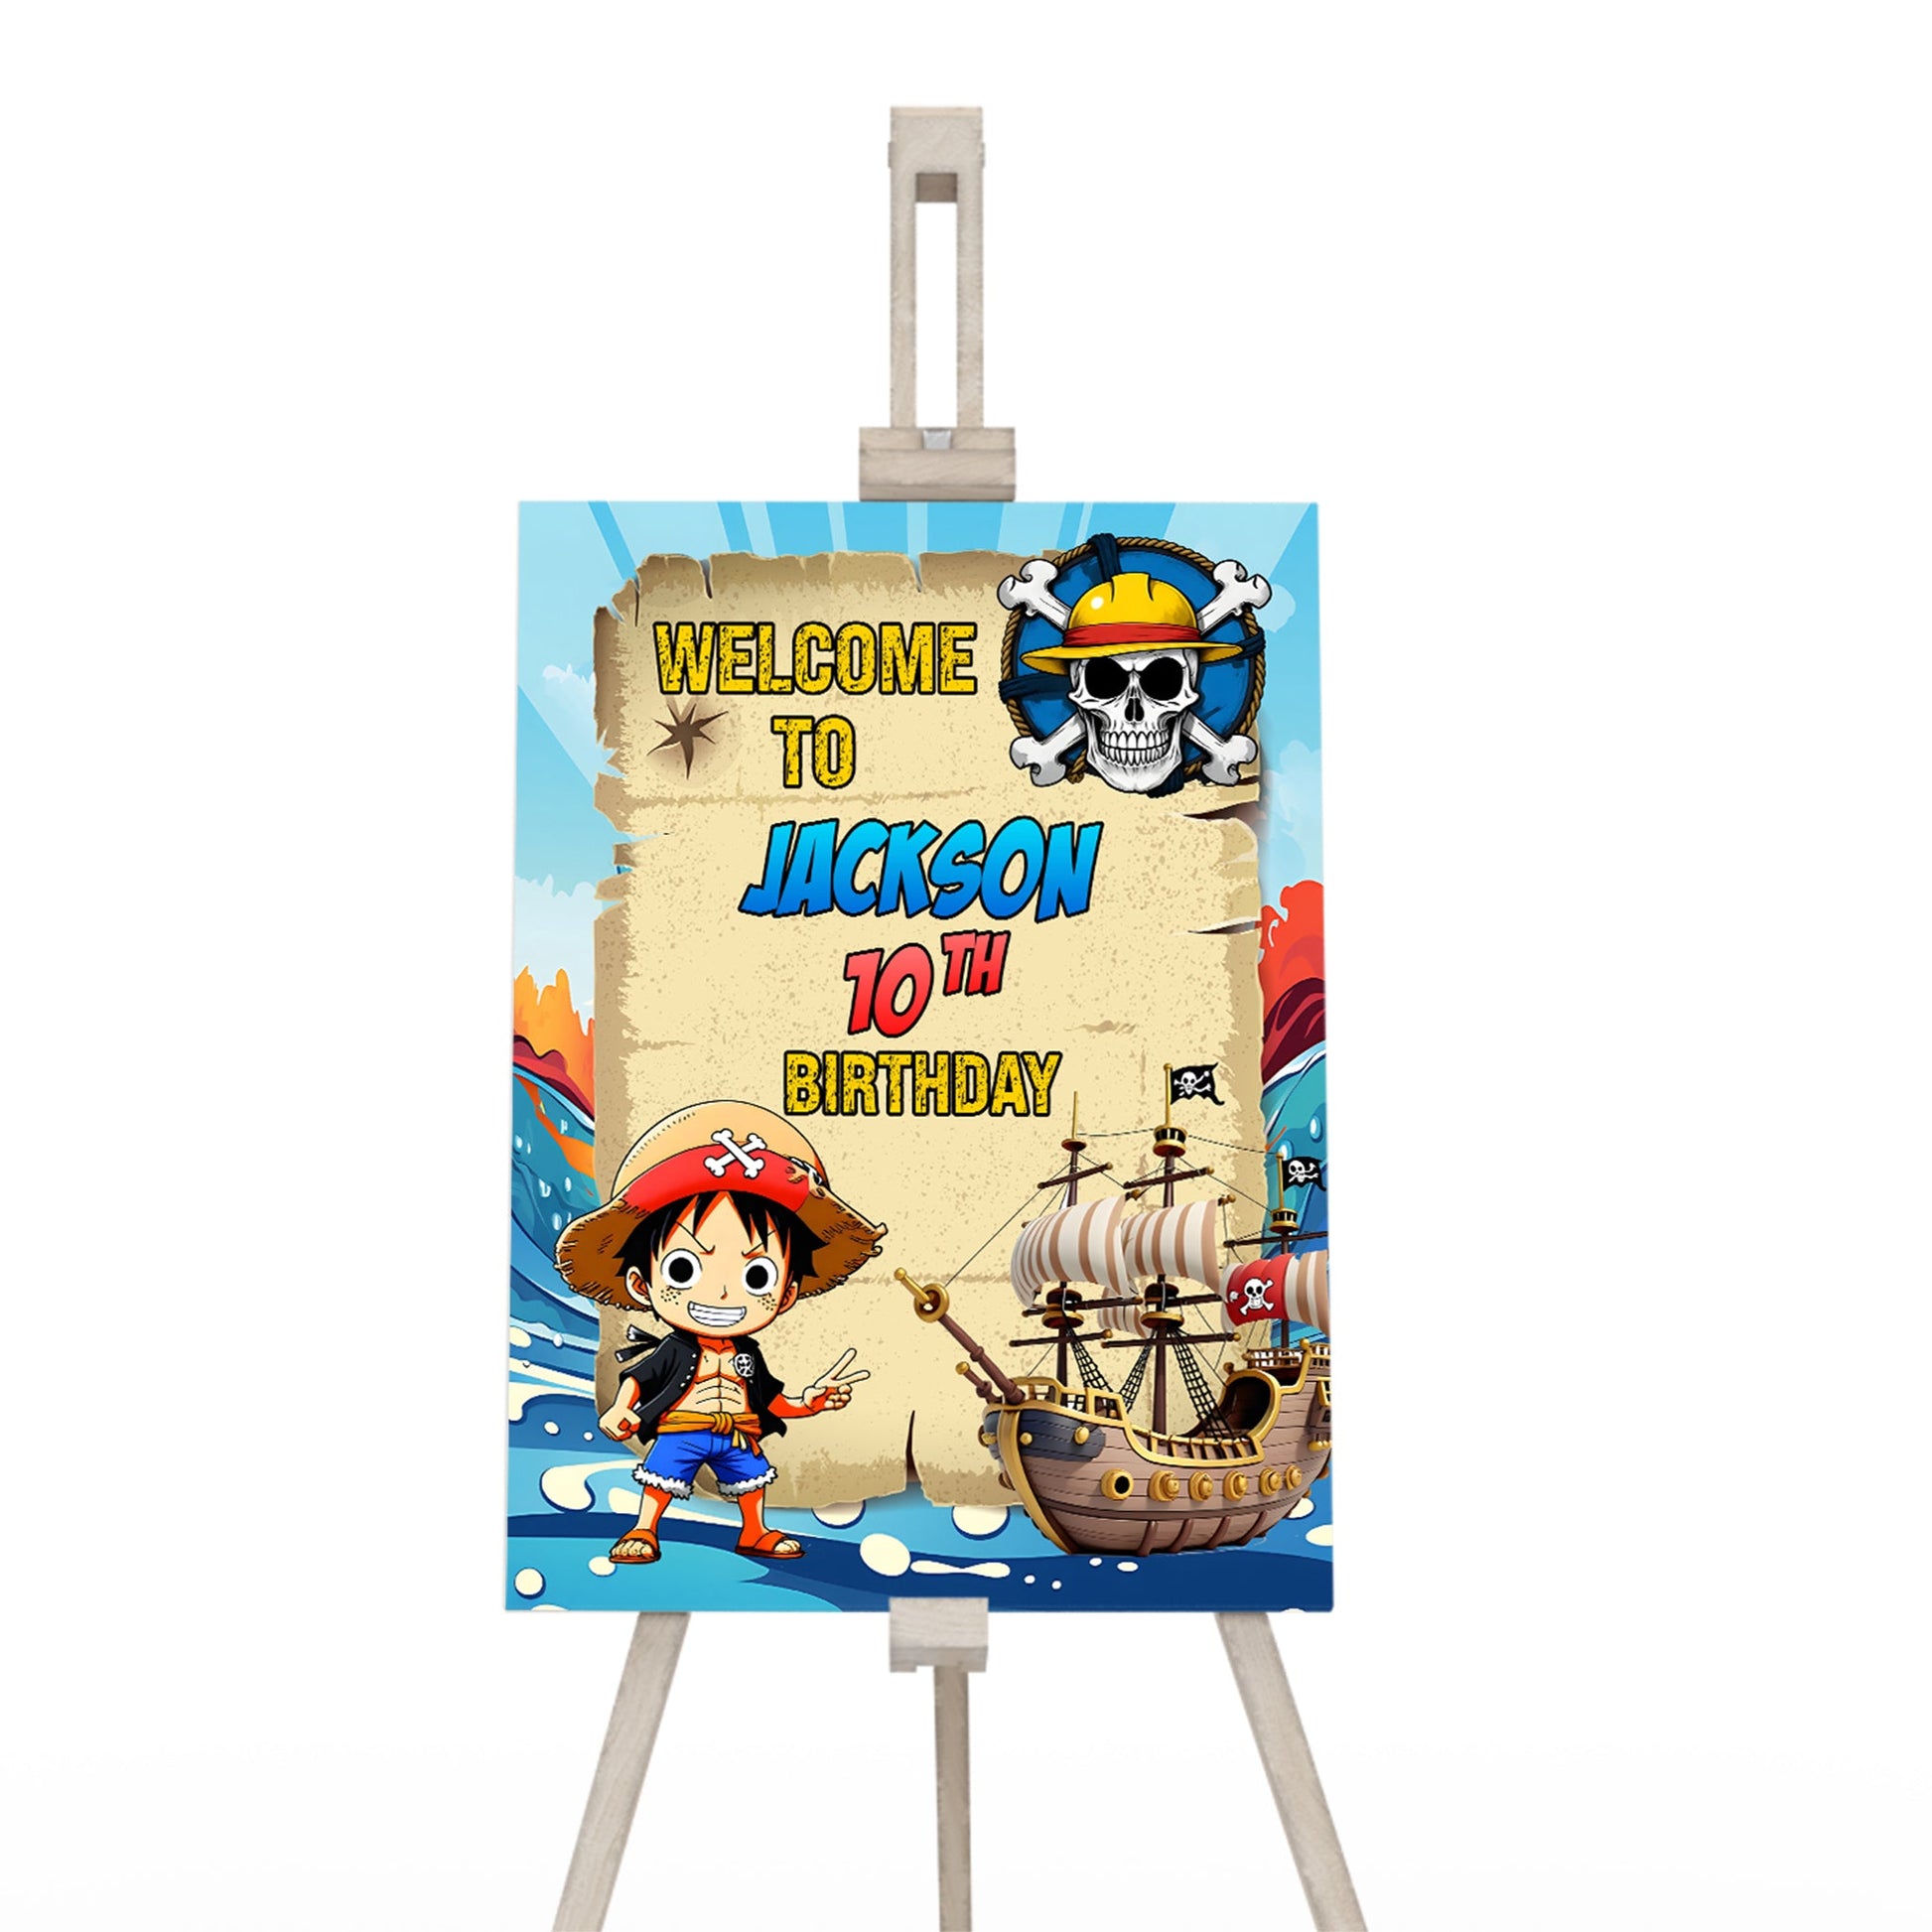 Welcome Sign with One Piece Manga Series Theme